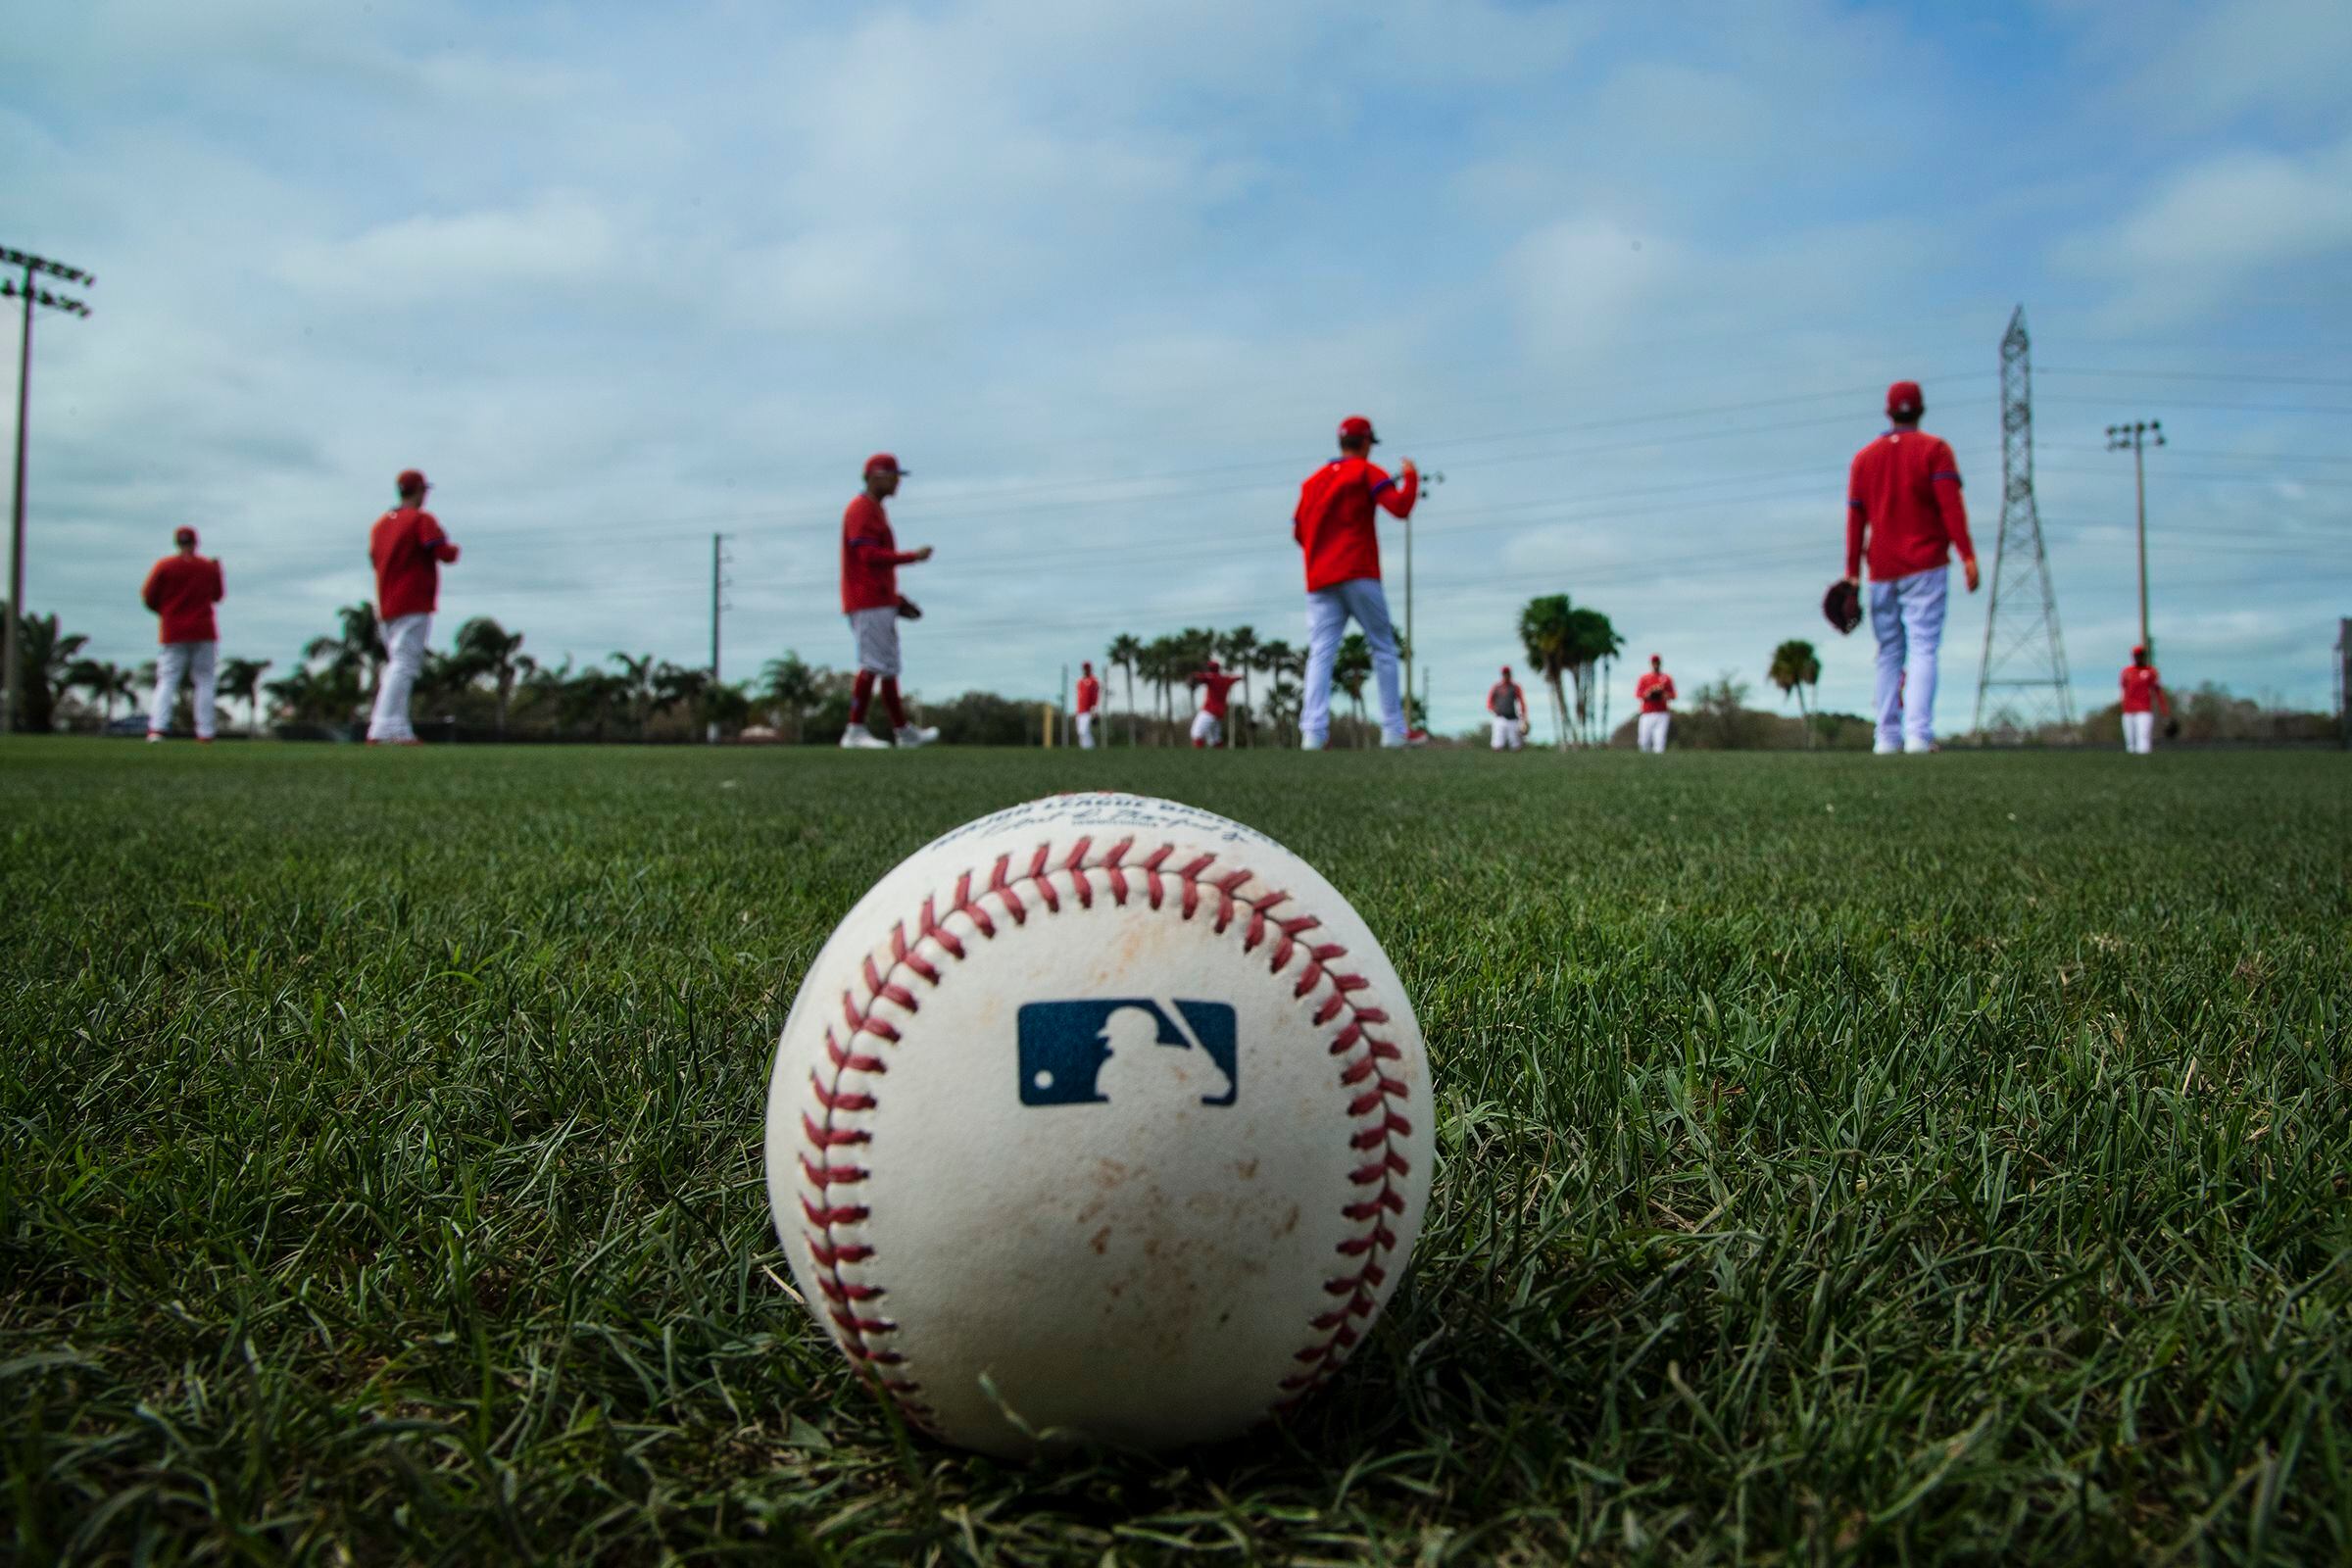 Philadelphia Phillies plan for traditional 2021 spring training schedule  with fans